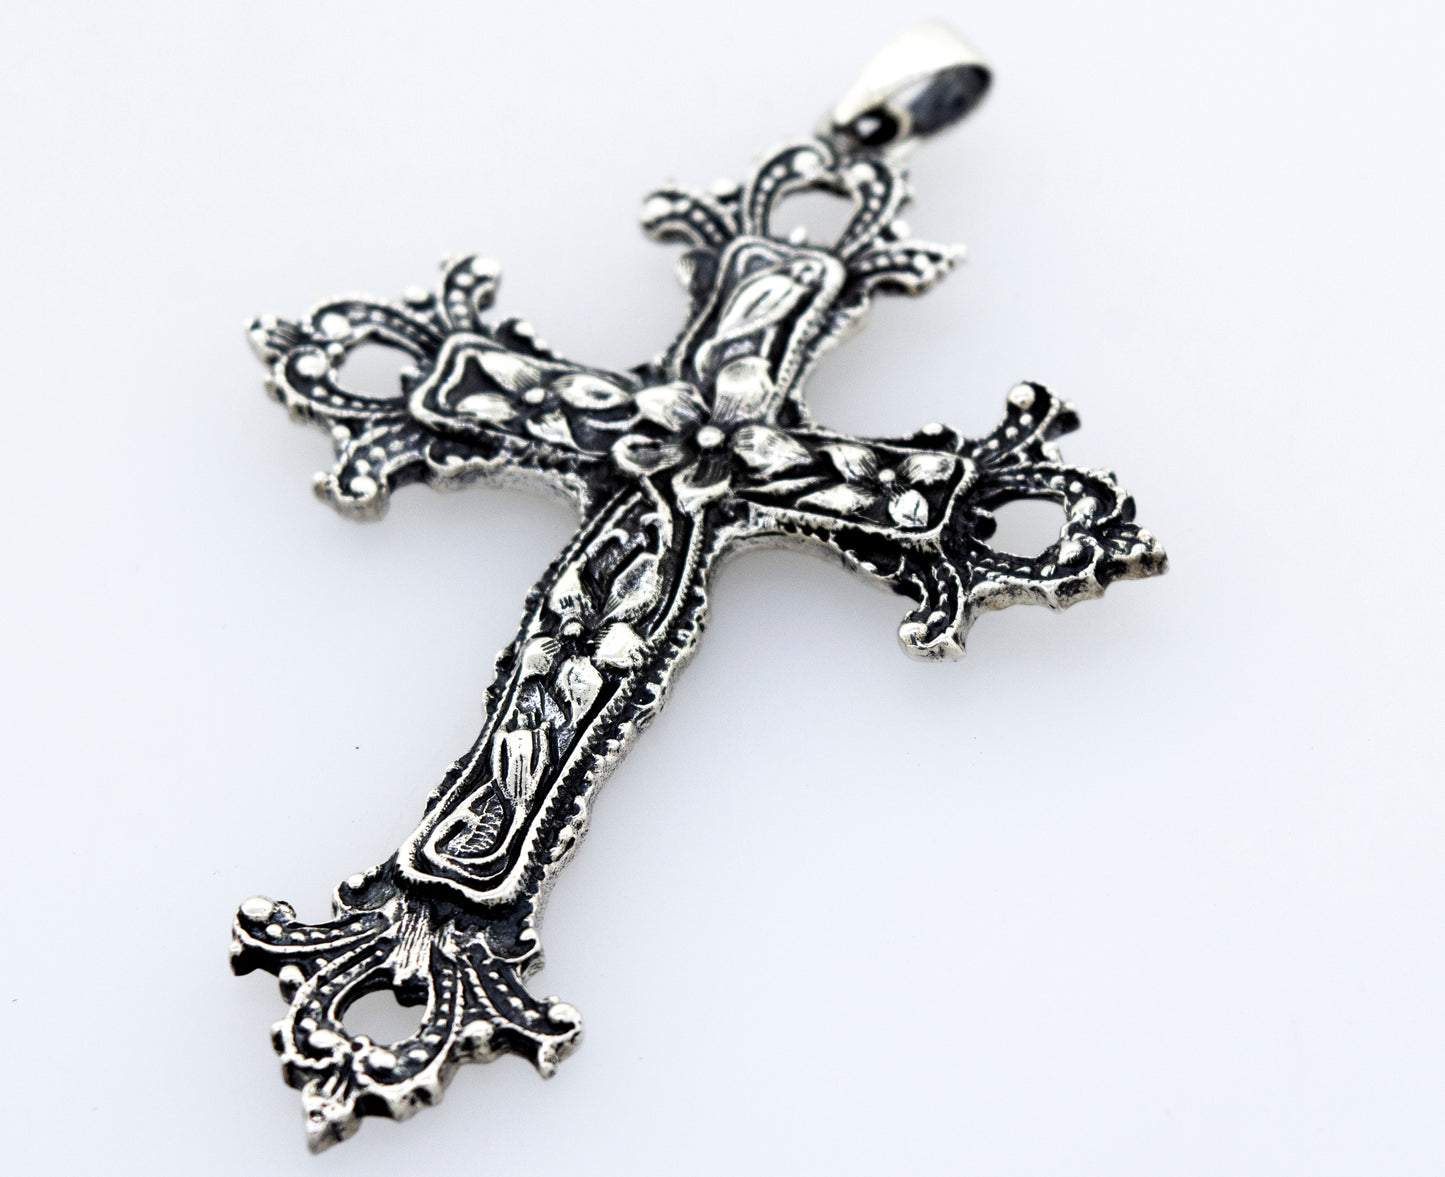 An ornate Medieval Floral Cross Pendant, a statement centerpiece on a white surface by Super Silver.